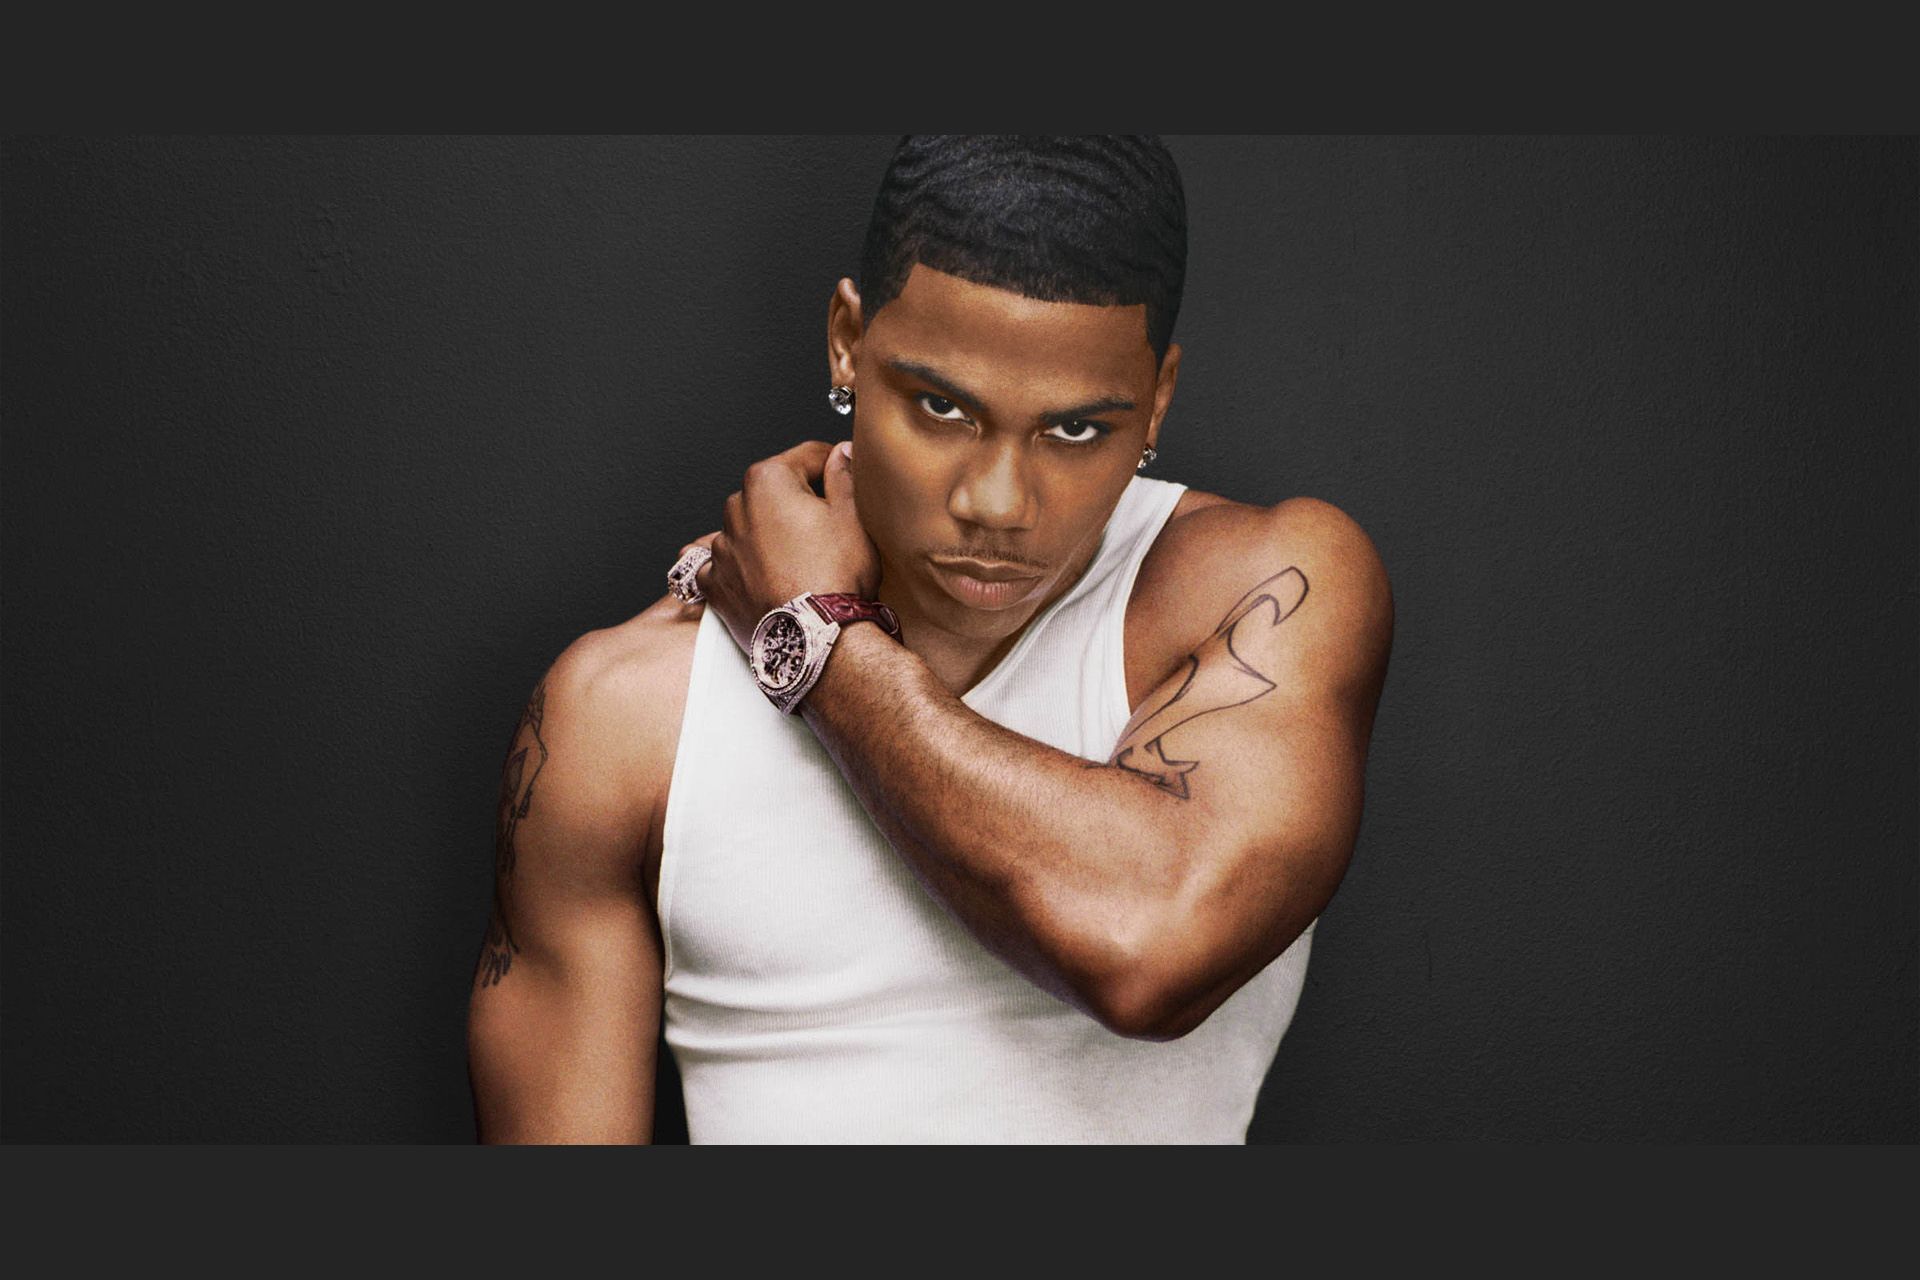 Мужчина рэпер. Nelly 2022. Nelly американский рэпер. Nelly 2021.